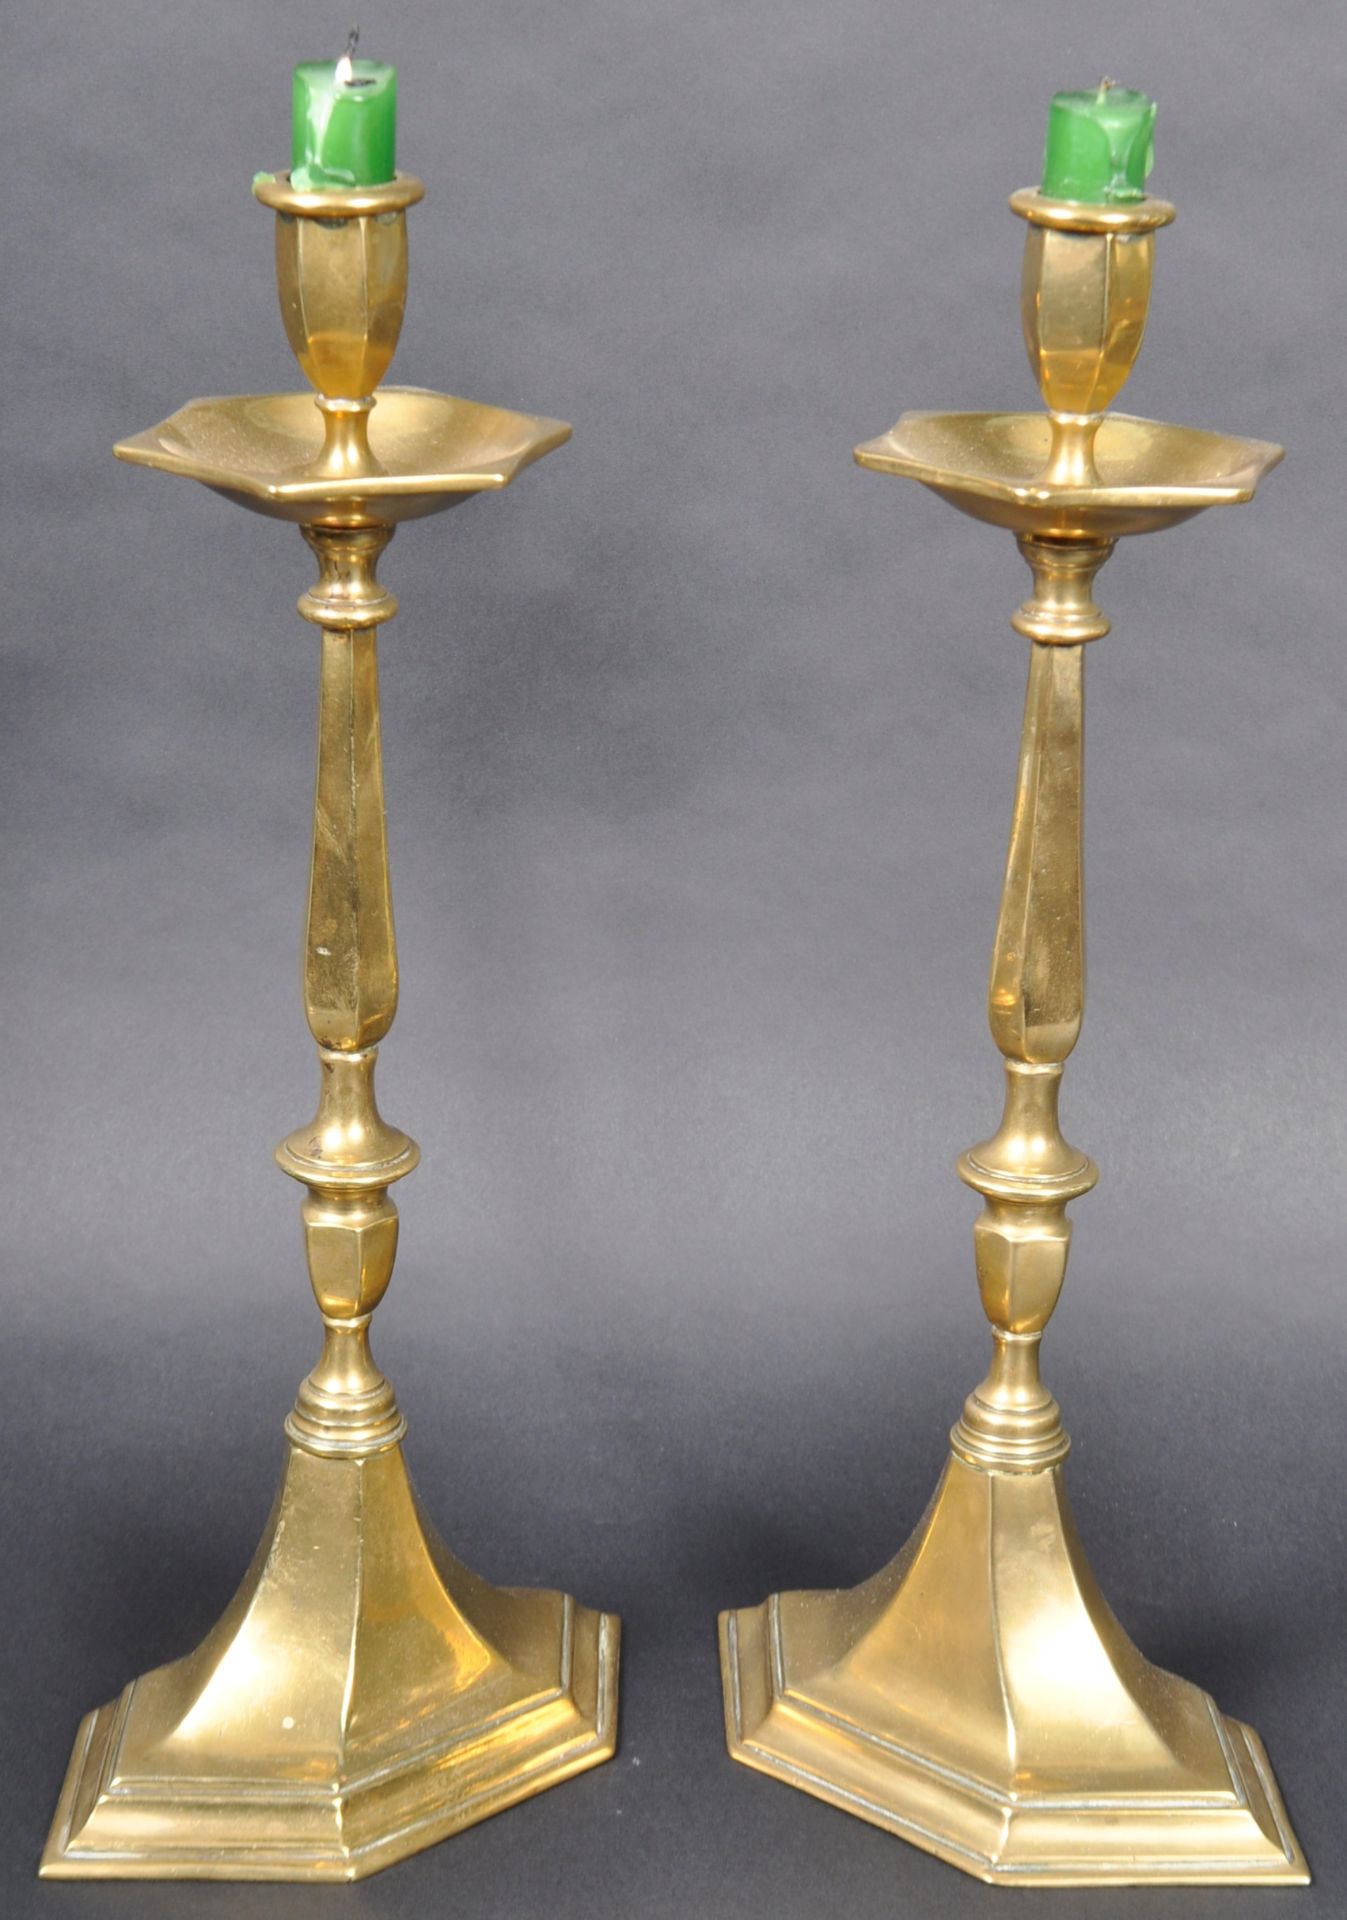 PAIR OF EARLY 20TH CENTURY BRASS CANDLESTICKS - Image 2 of 8